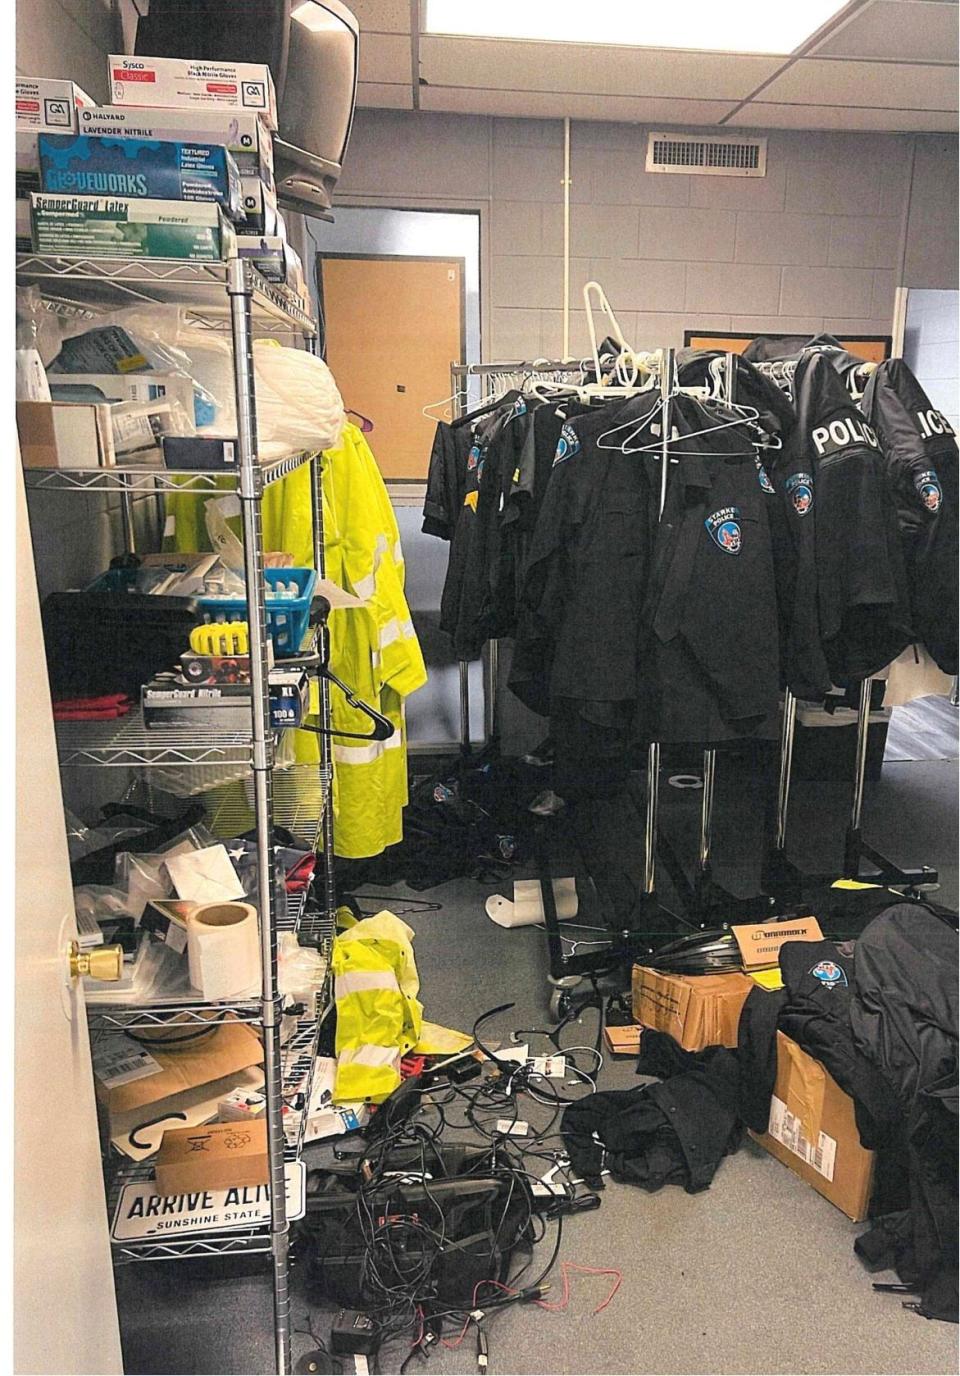 This photo in the memo showed uniforms were not secured and were just thrown into a room.